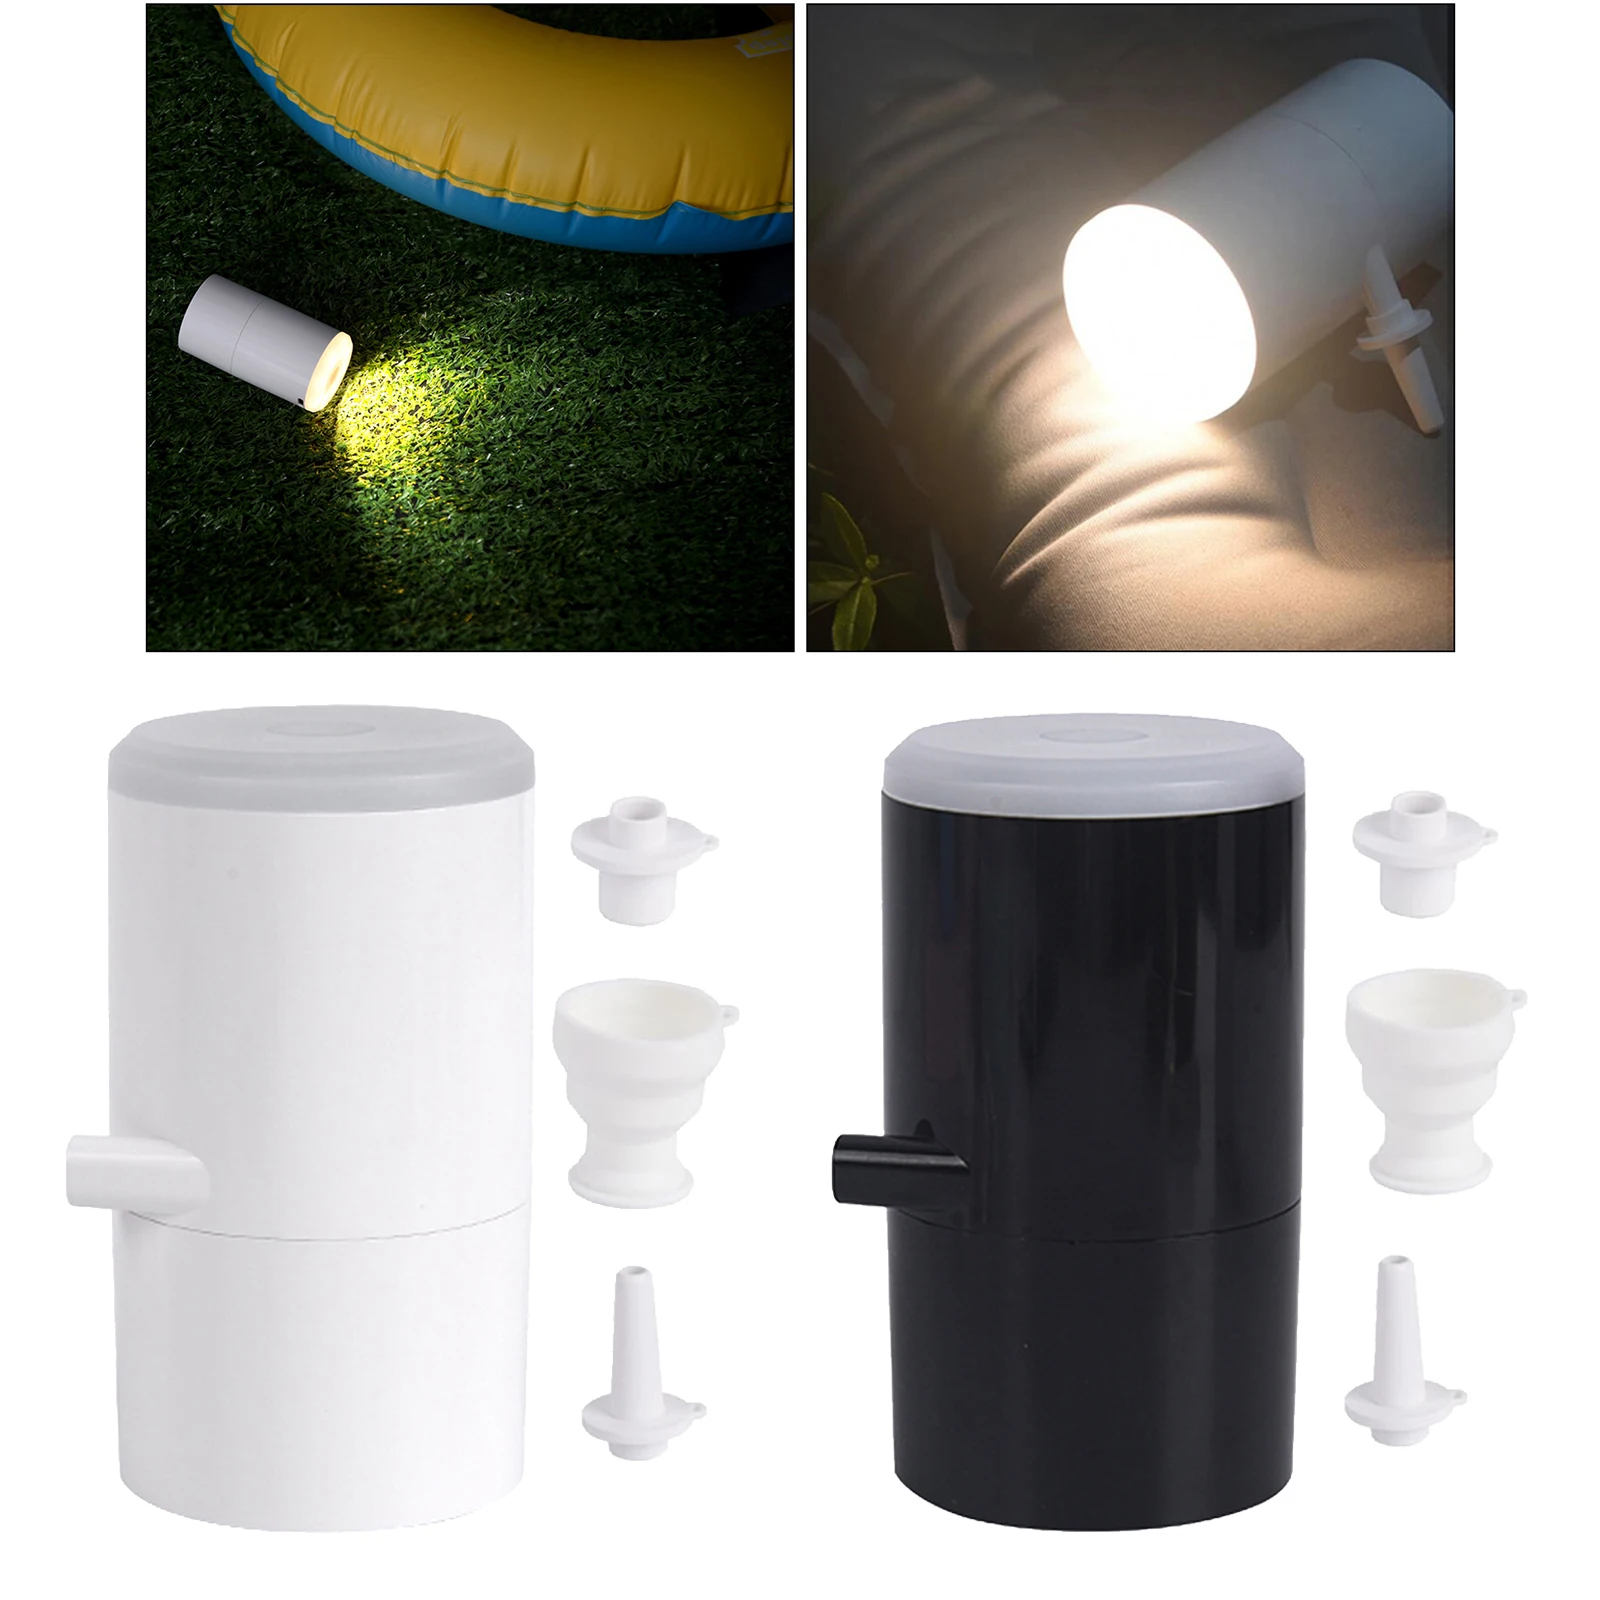 Mini USB Air Pump Inflator Swimming Pool Bathtube Floats Rings Tube Boats Mat Inflator Air Filling Inflatable with 3 Nozzles